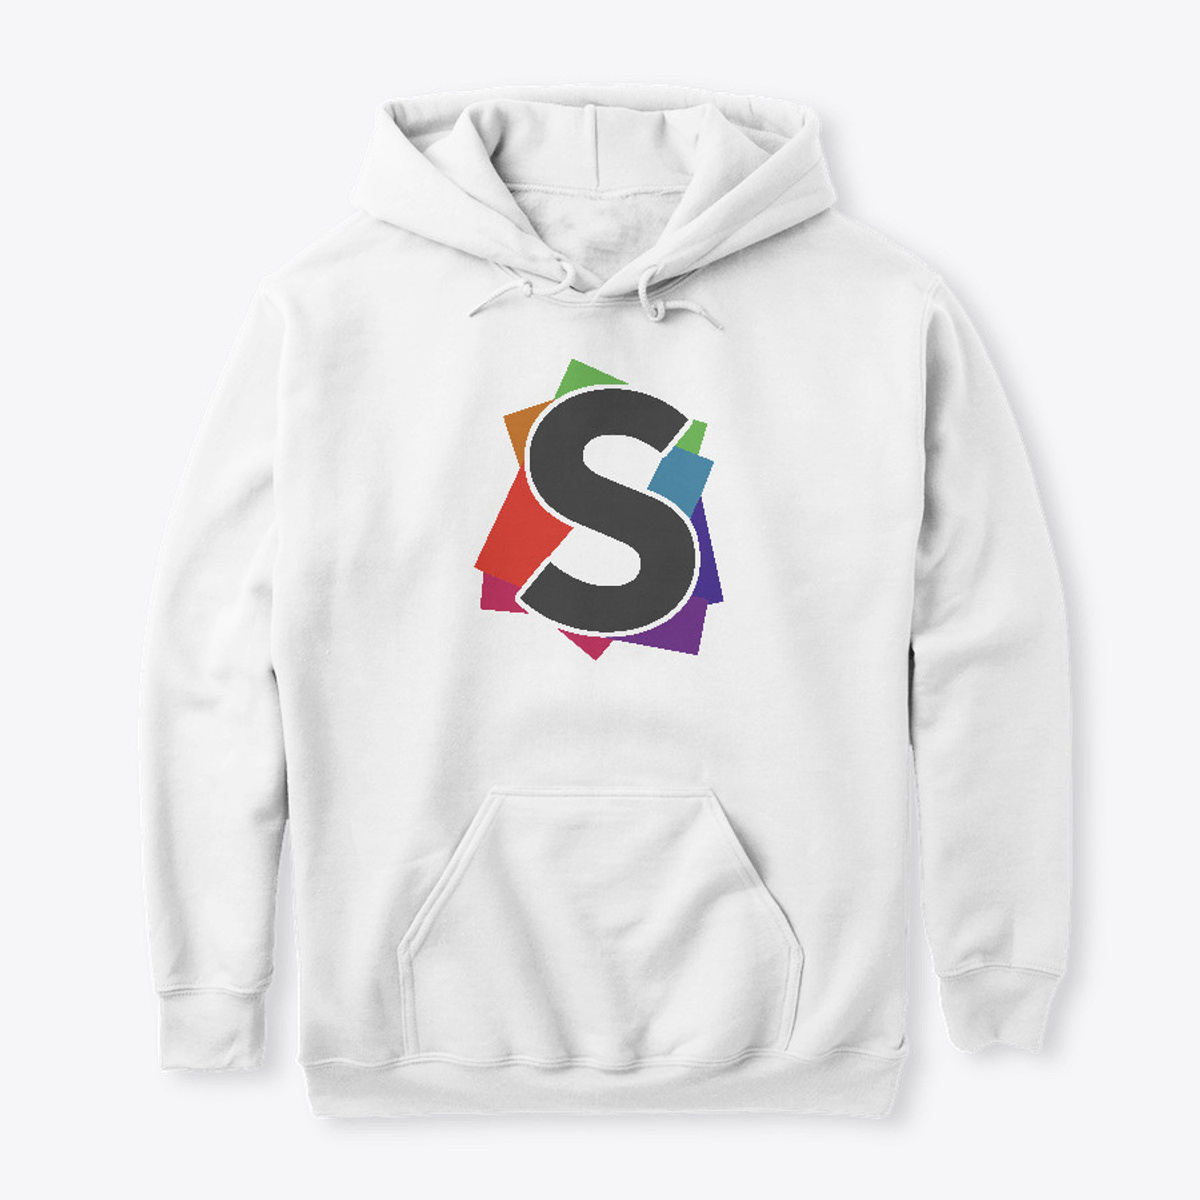 Synapse X - Full, White  Synapse Softworks Merch